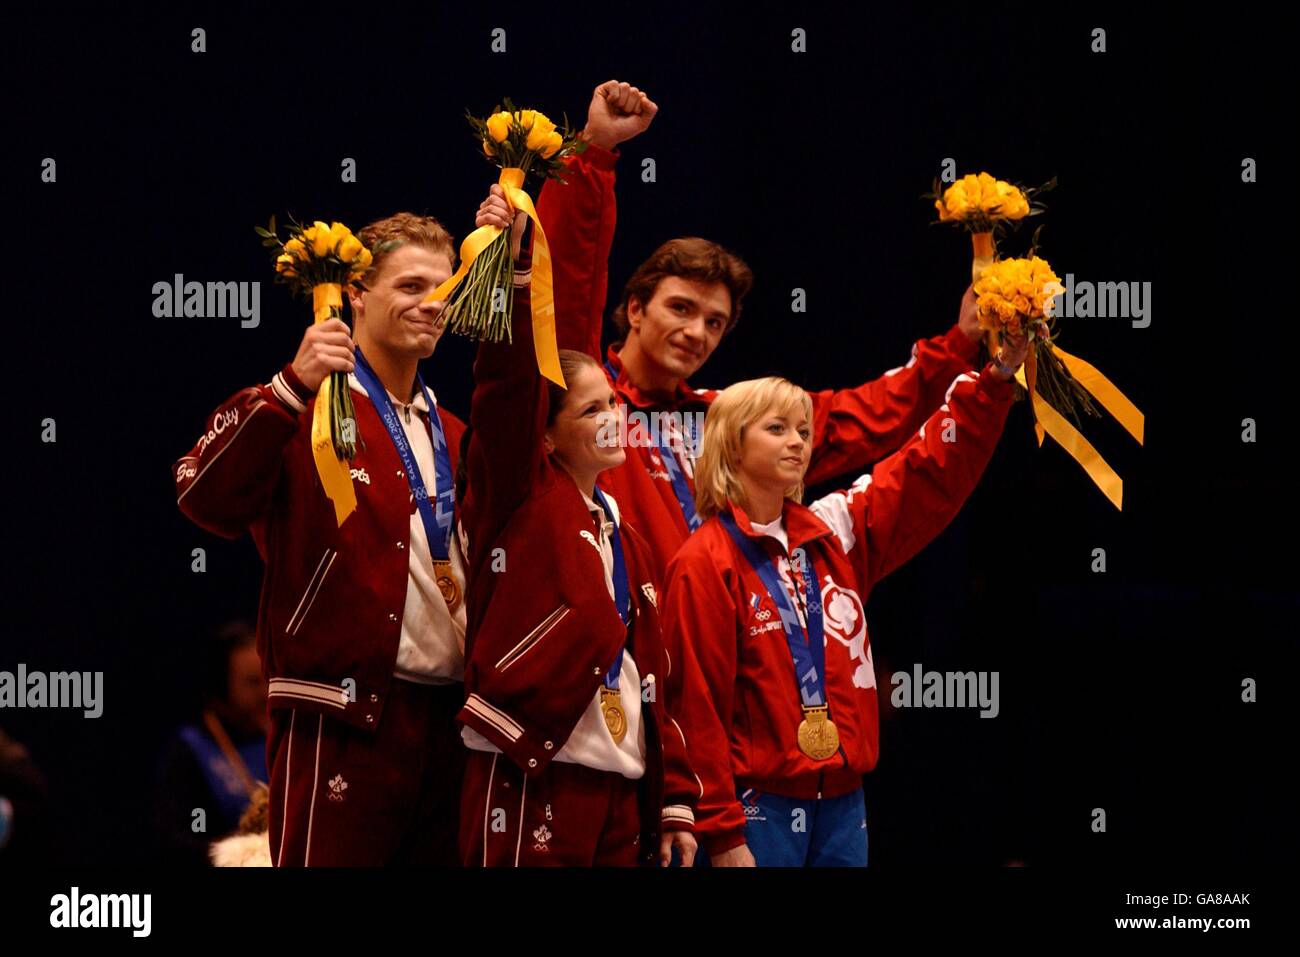 l-r; Canada's Jamie Sale and partner David Pelletier with their Gold medal's along with Russia's Elena Berezhnaya and partner Anton Sikharulidze (the original winners of the pairs competition) who also hold their gold medal's Stock Photo